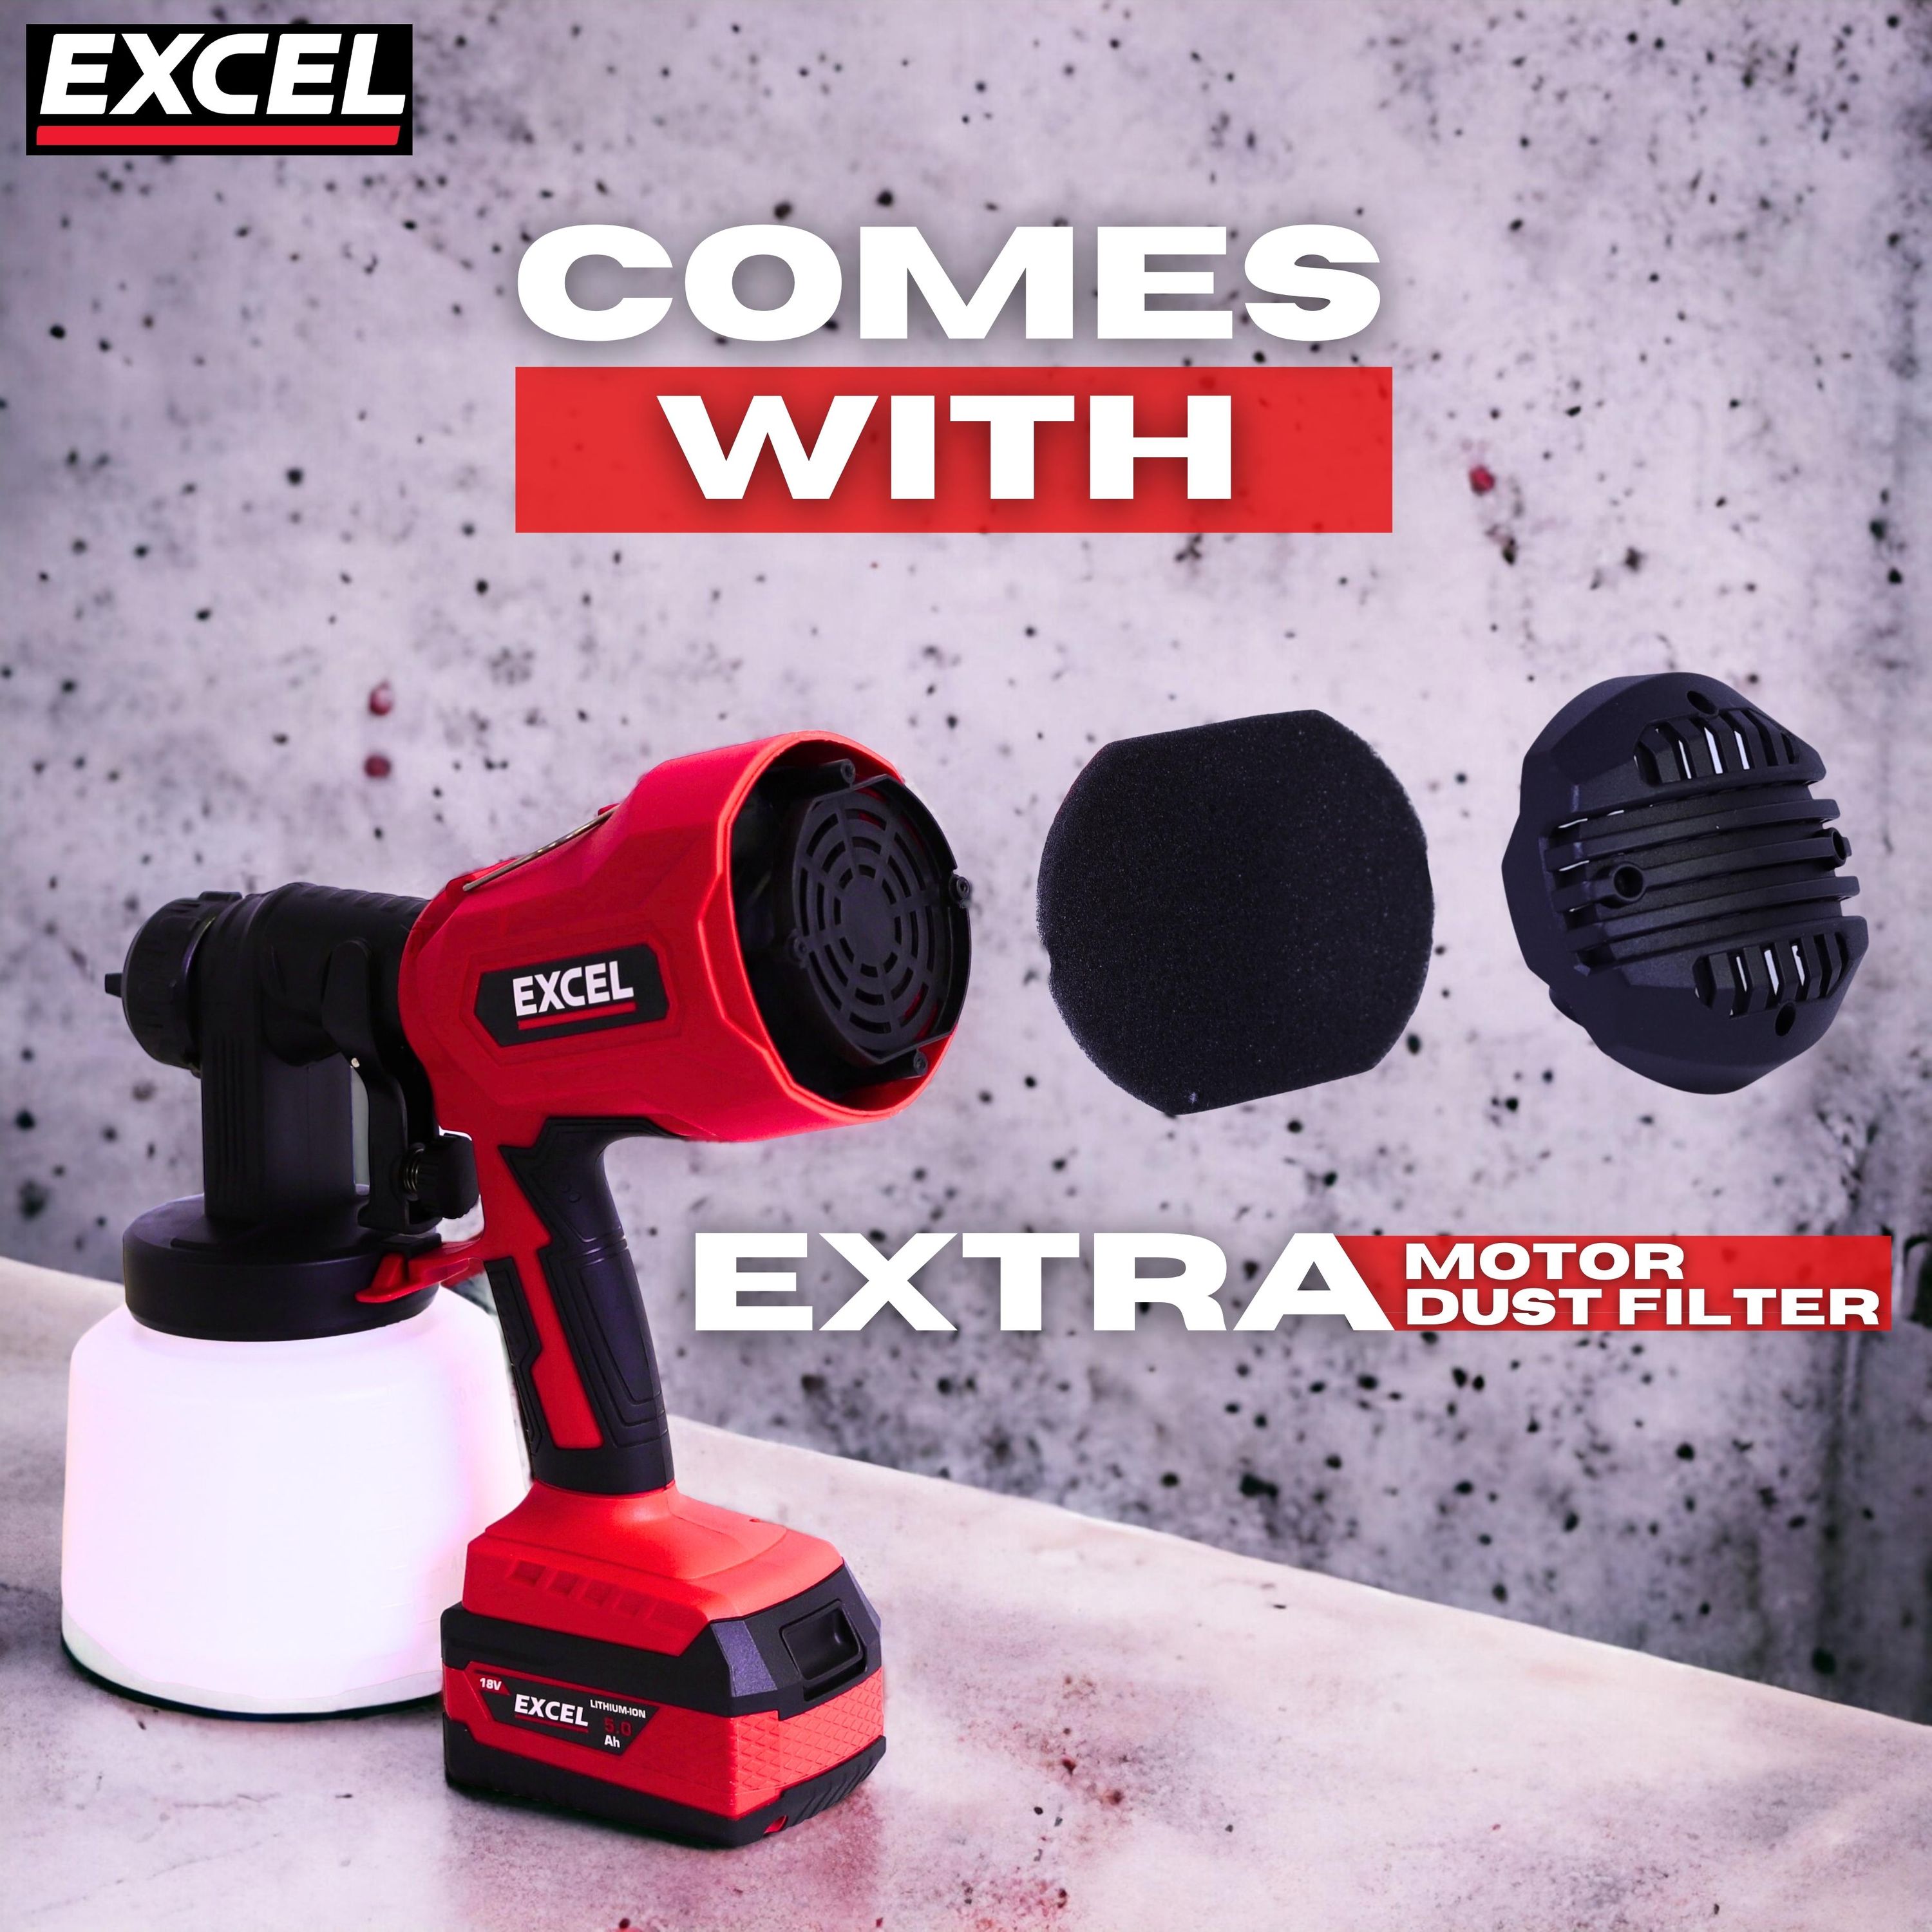 Excel 18V Cordless 1000ml Spray Gun with 1 x 2.0Ah Battery & Charger